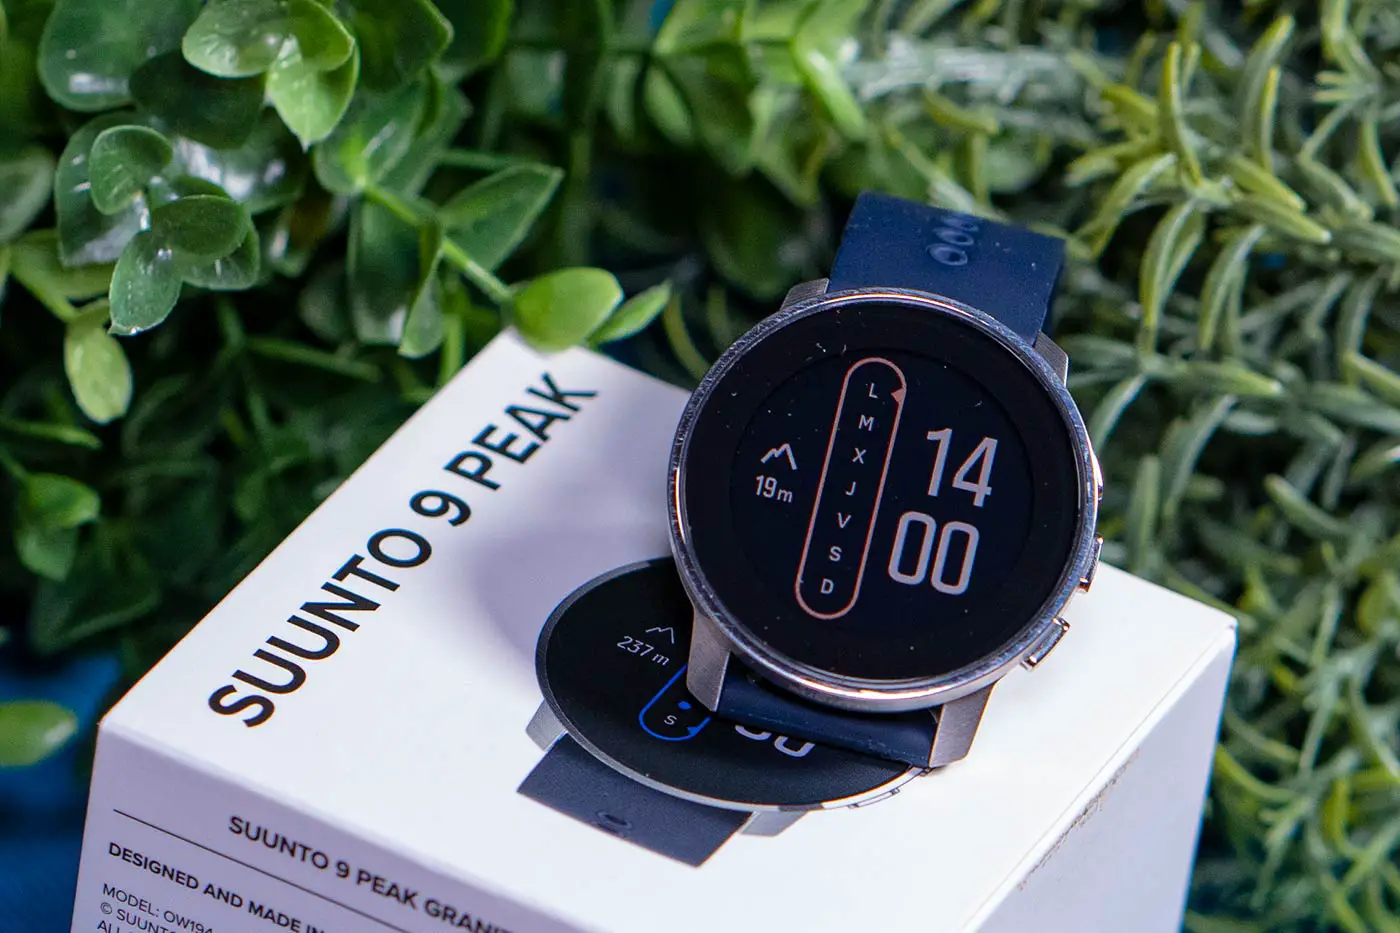 History and trivia about the Suunto 9 peak collection